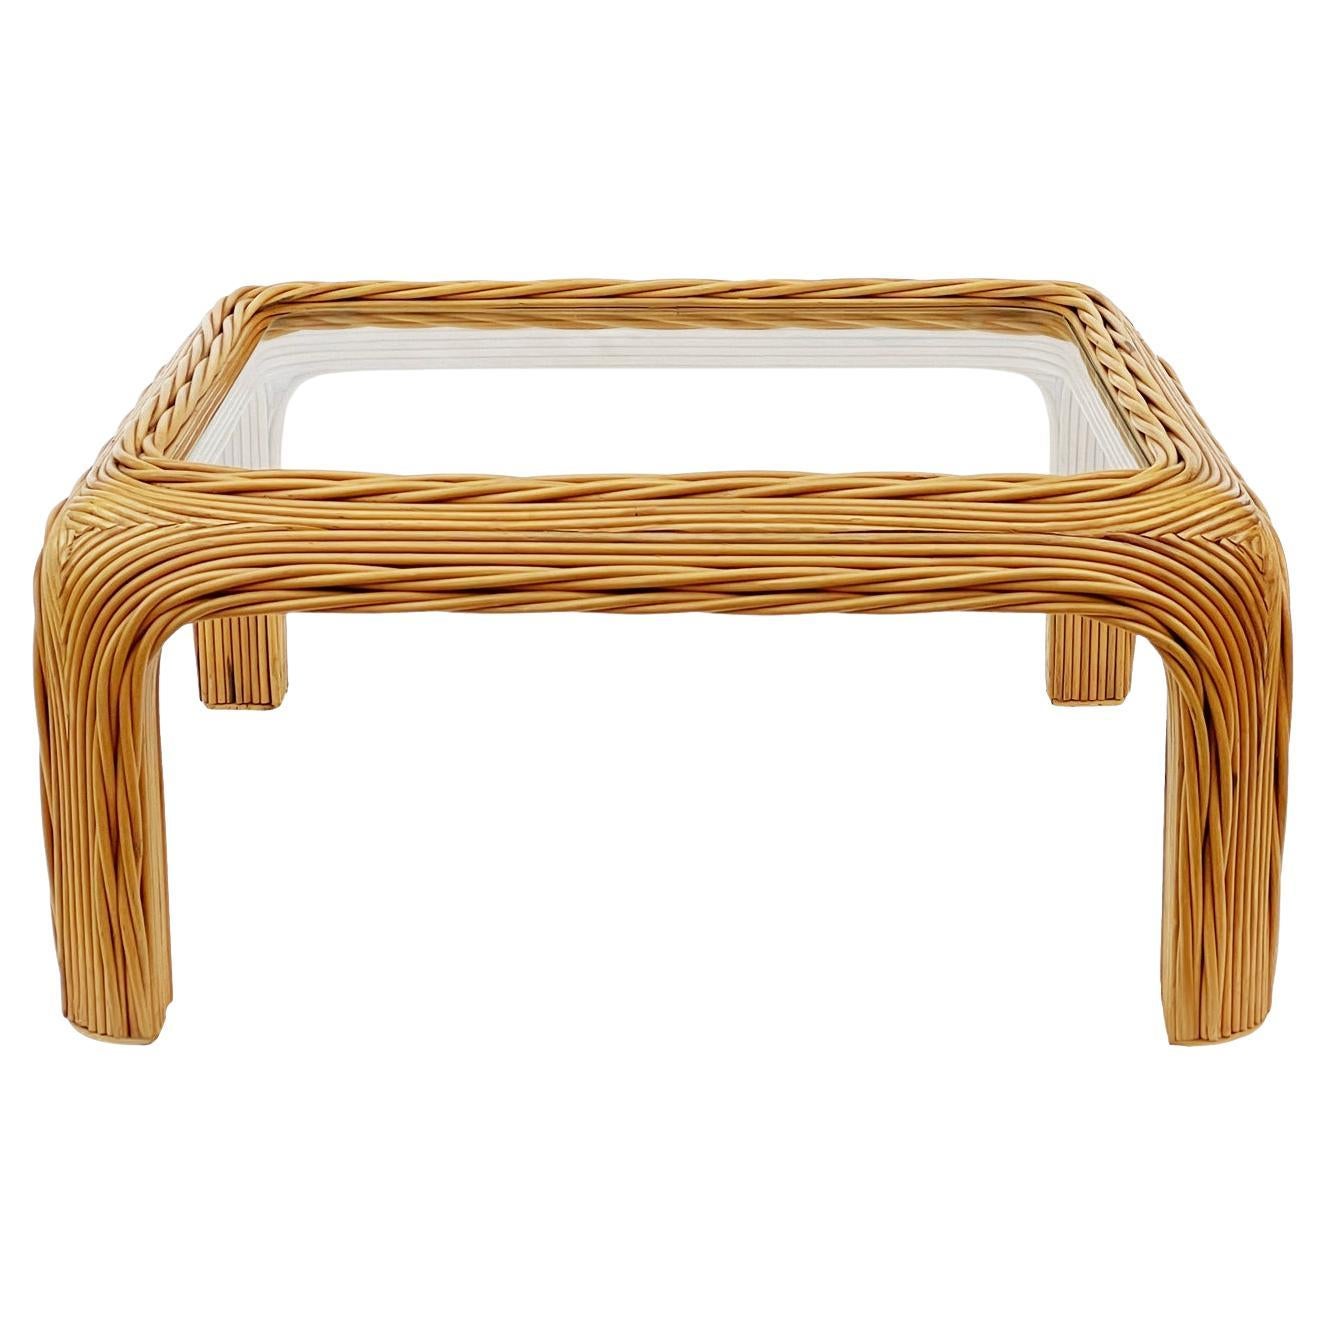 Midcentury Coastal or Boho Modern Woven Rattan & Glass Square Coffee Table  For Sale